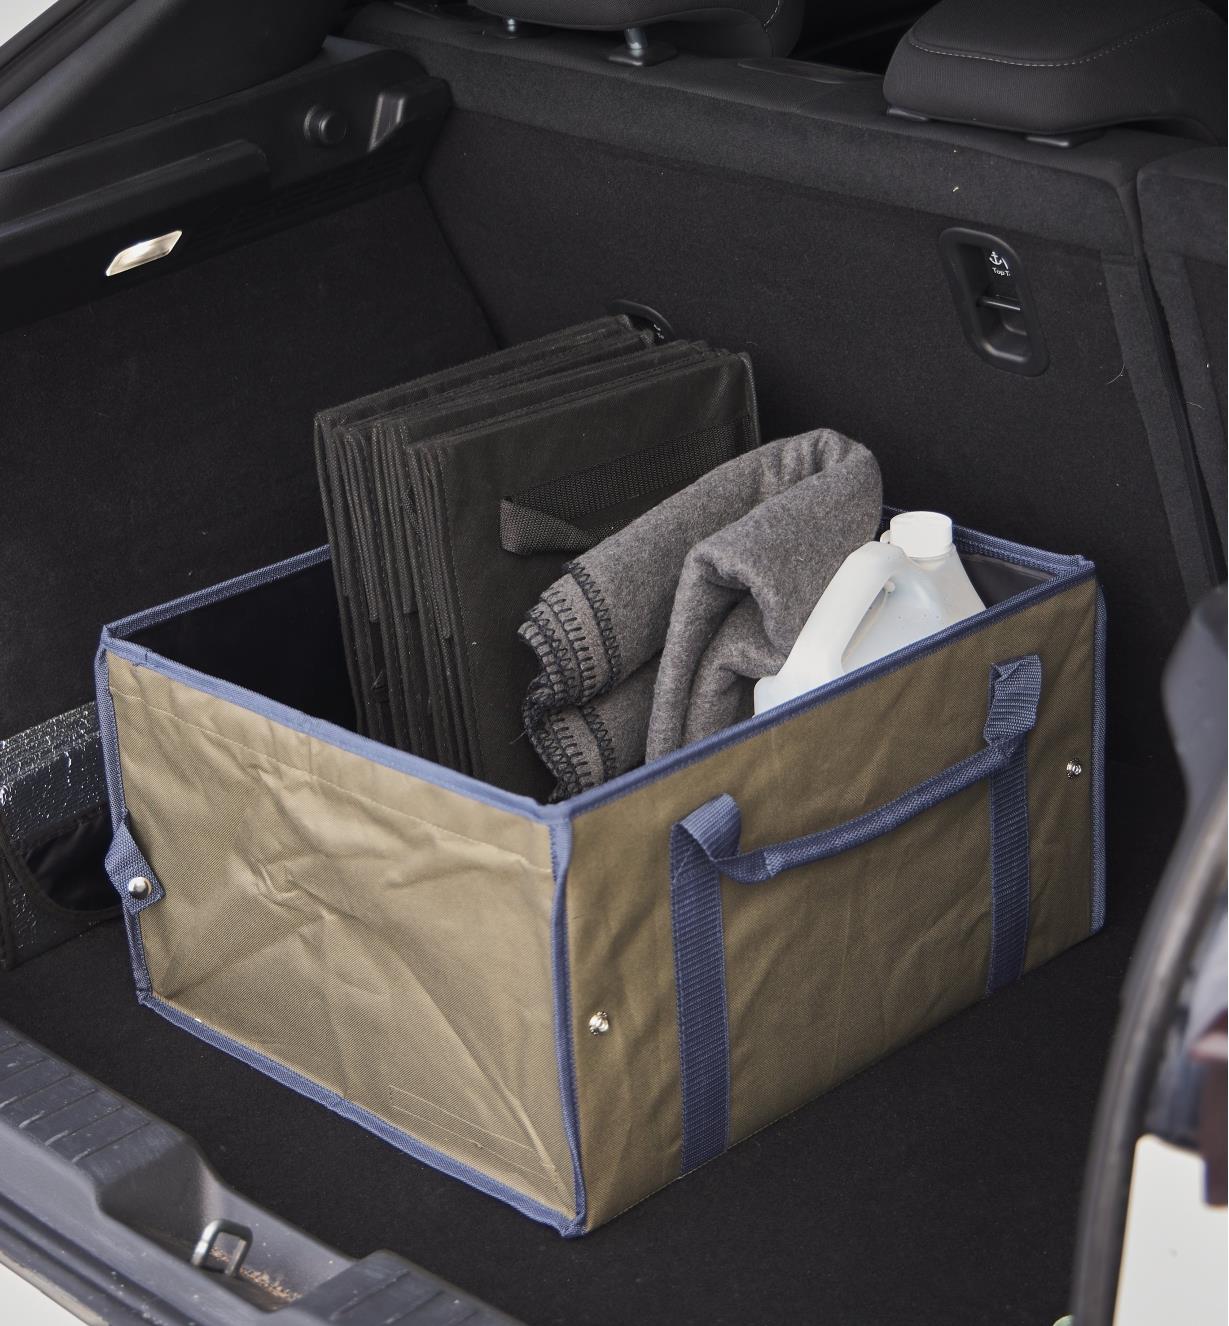 A large trunk organizer filled with items in the cargo area of a car